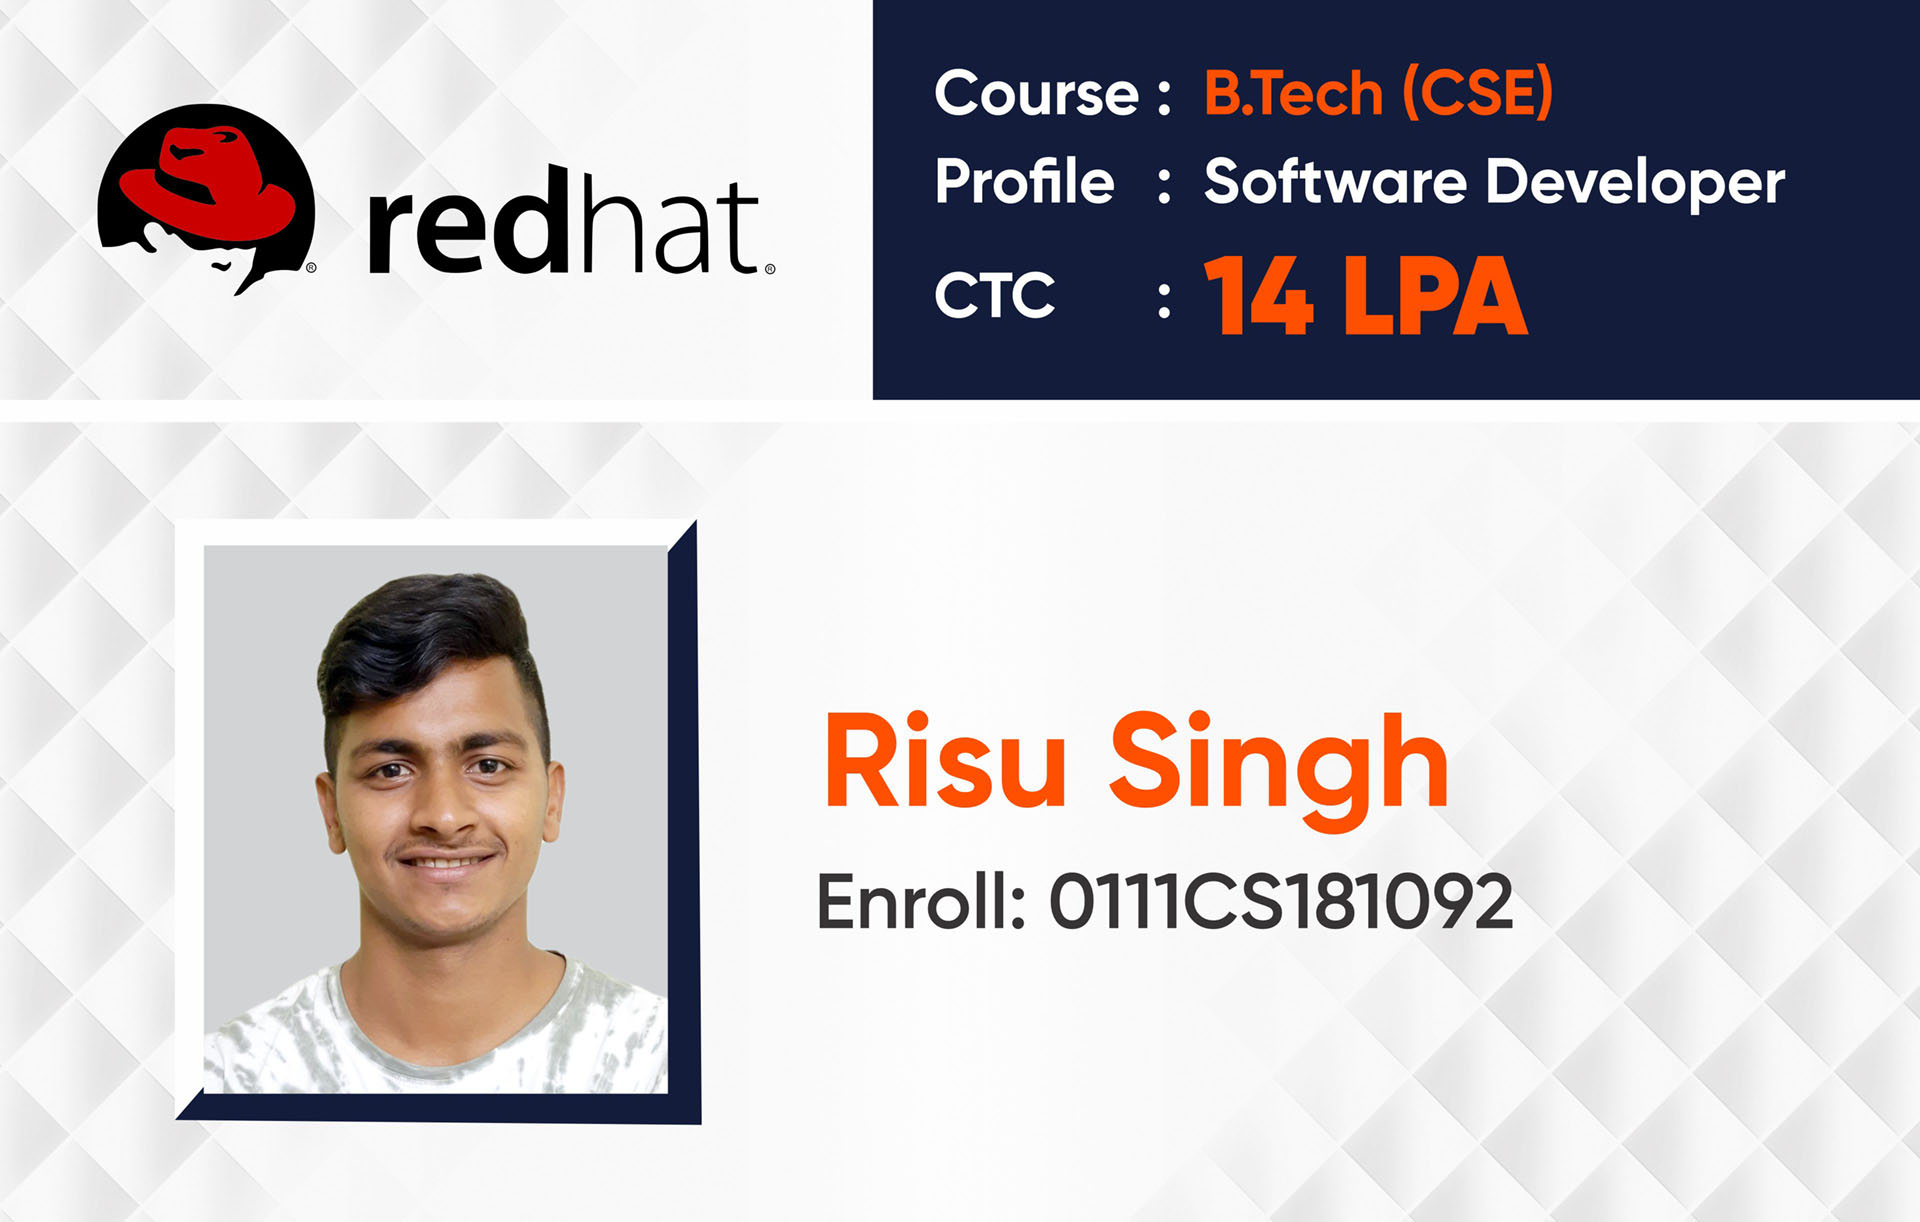 Placed in - redhat- CTC-14 LPA